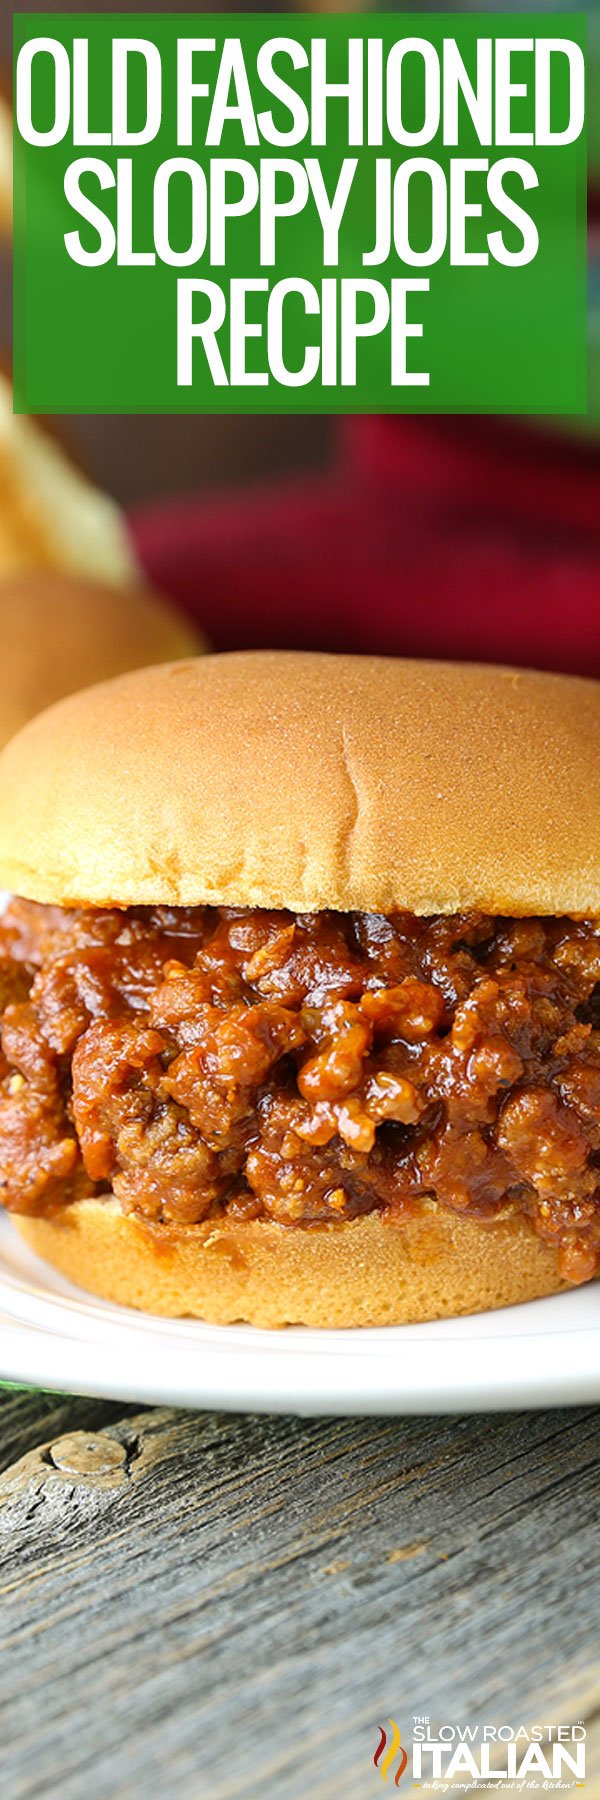 Old Fashioned Sloppy Joes Recipe - PIN